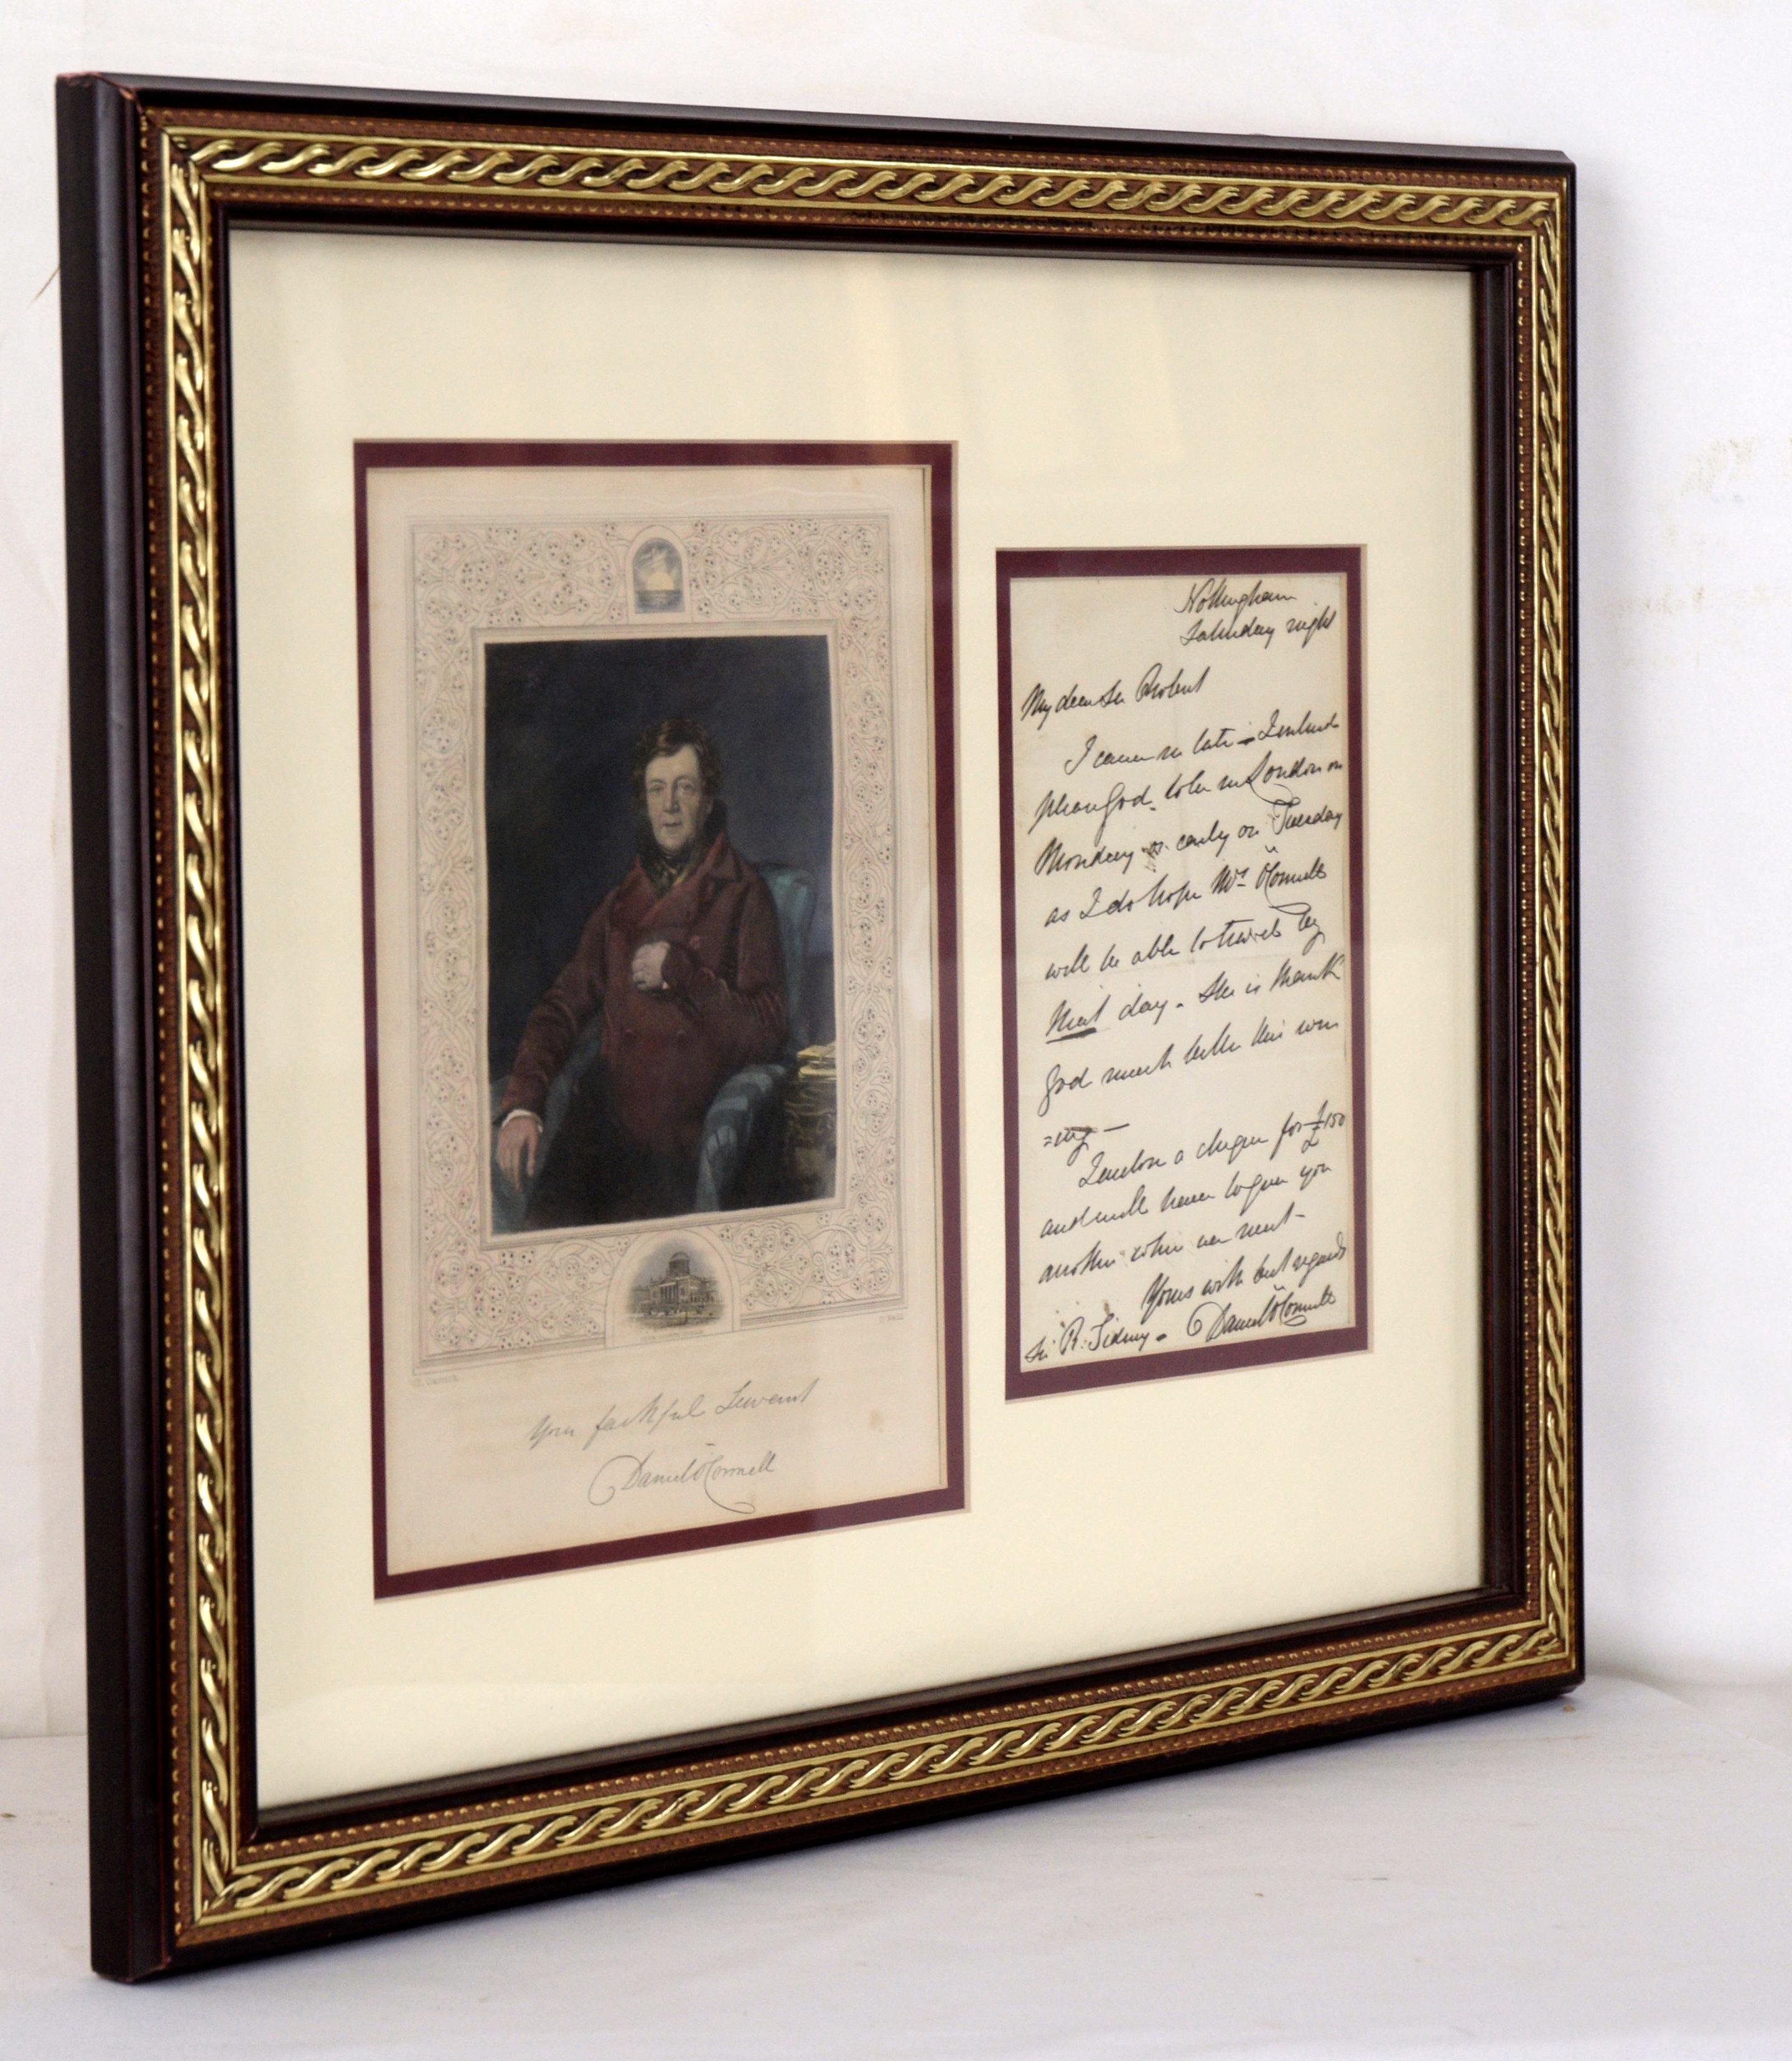 Paper Hand Written Letter from Daniel O'Connell, with Portrait Engraving by O'Neil For Sale